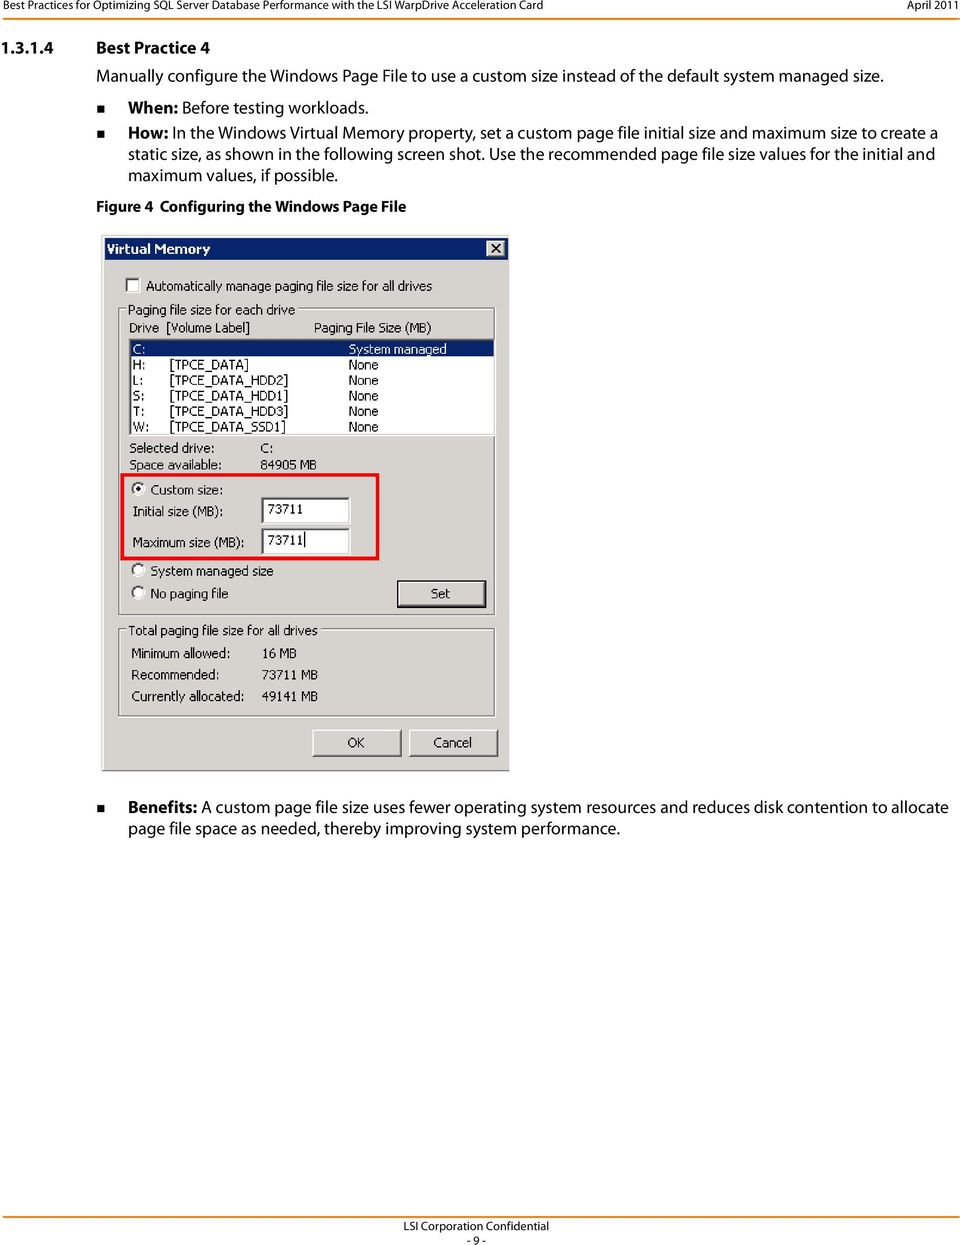 How: In the Windows Virtual Memory property, set a custom page file initial size and maximum size to create a static size, as shown in the following screen